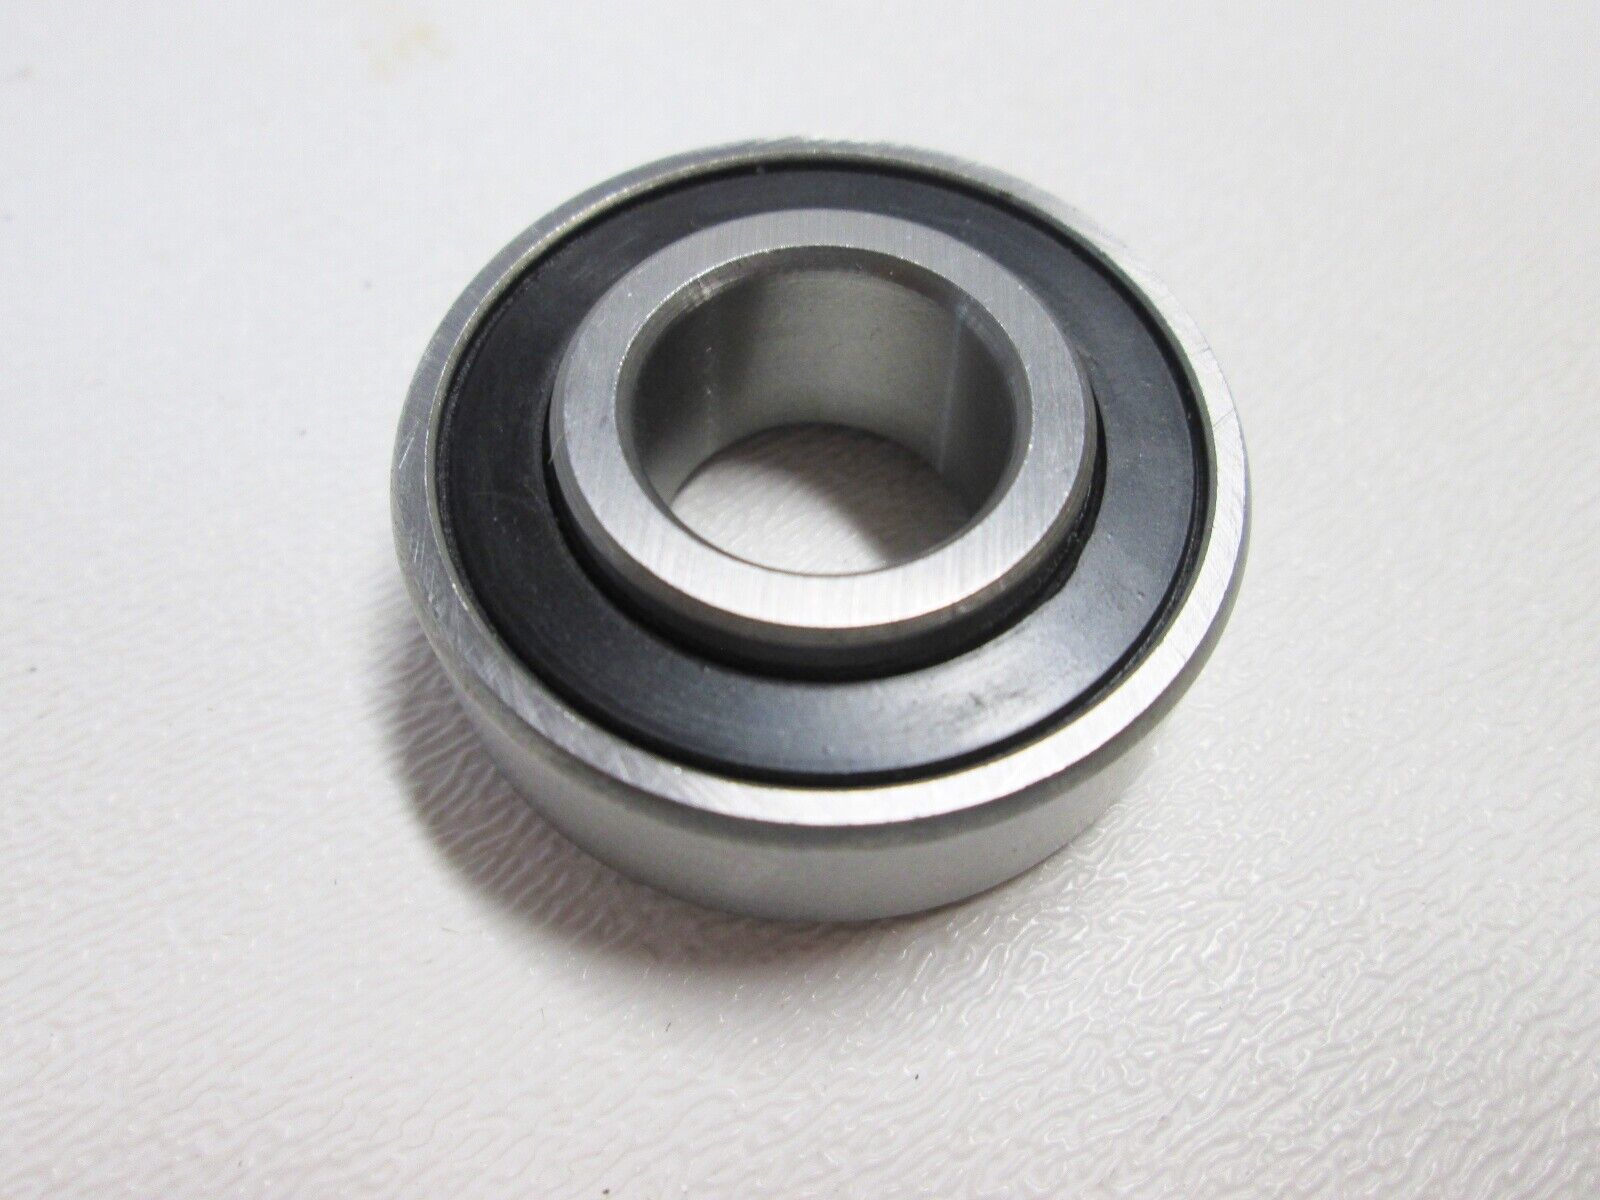 87008 PREMIUM 8x24x10.319/8 Single Row Metric Ball Bearing with Extended Inner Thumbnail